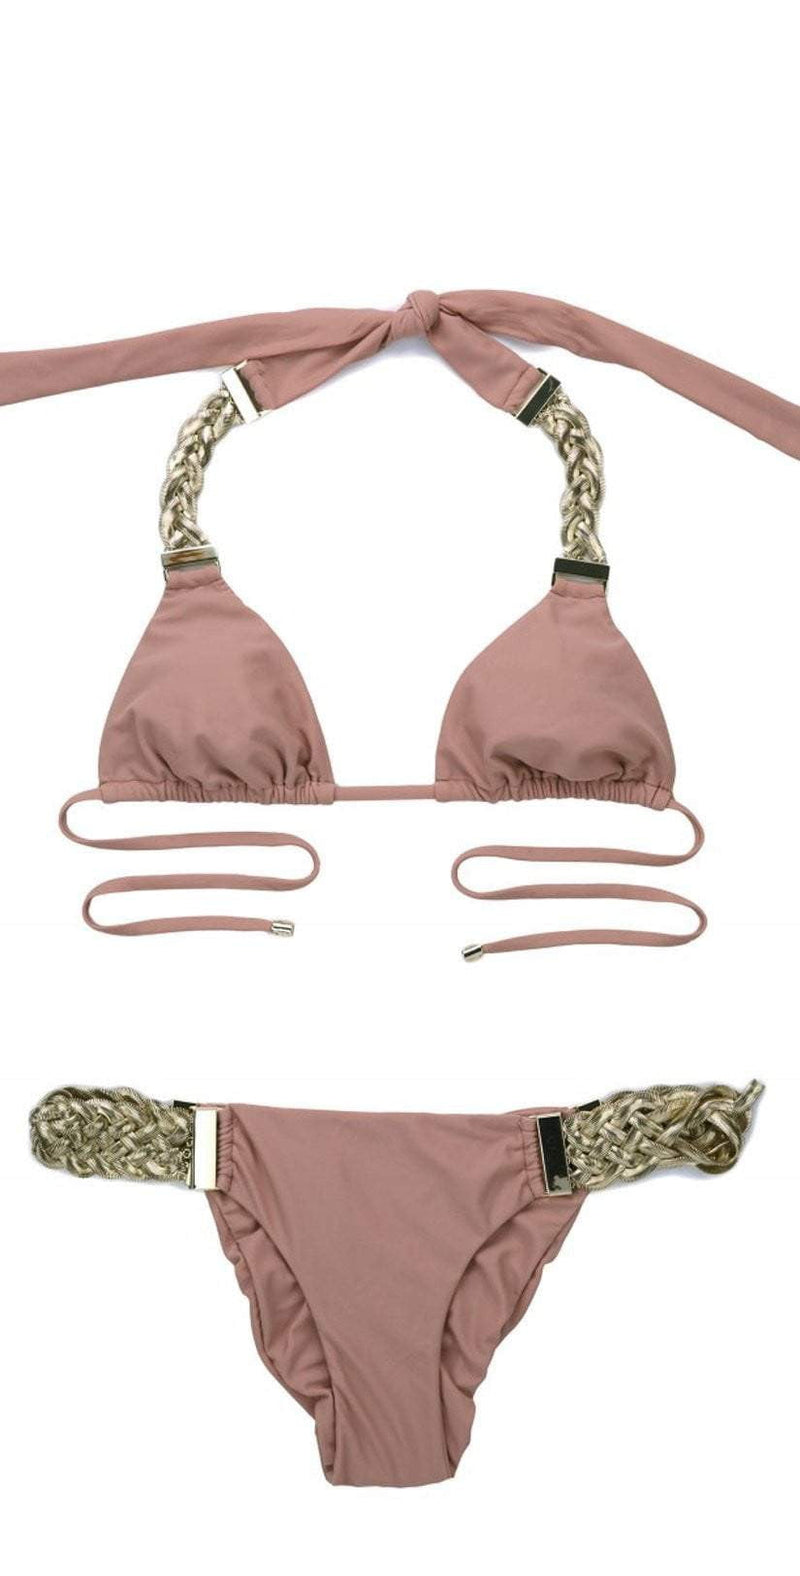 Beach Bunny Alexa Triangle Top in Whiskey Rose B18100T1-WHRS: